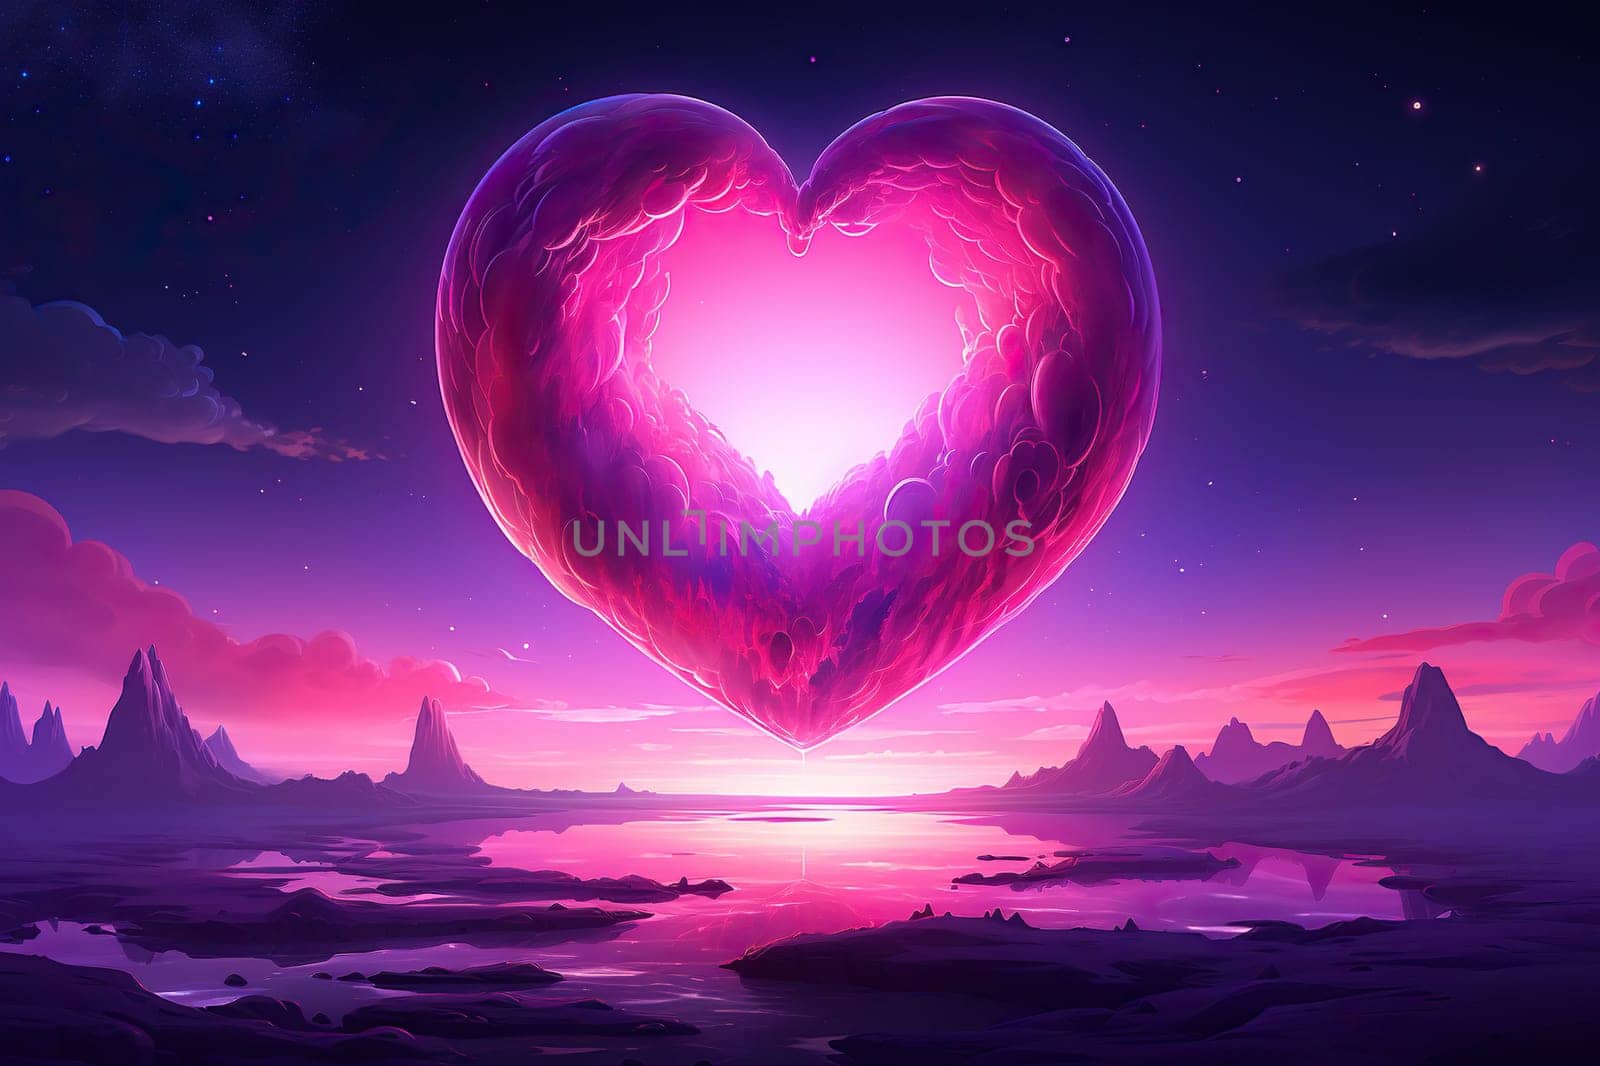 Huge pink heart in the night sky. Romantic illustration. Generated by artificial intelligence by Vovmar